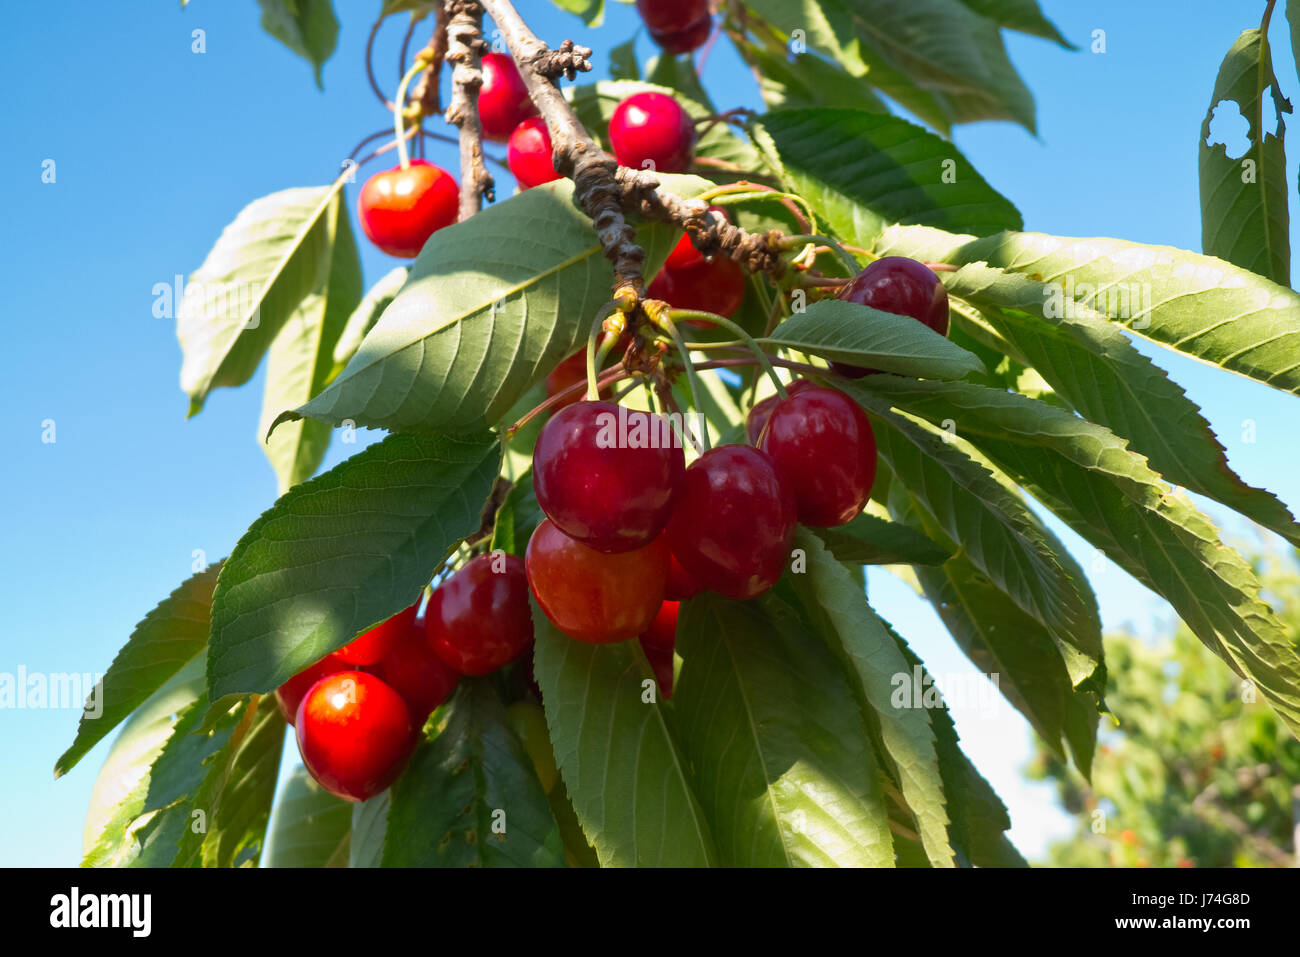 Cherry orchard with fruits growing. Stock Photo